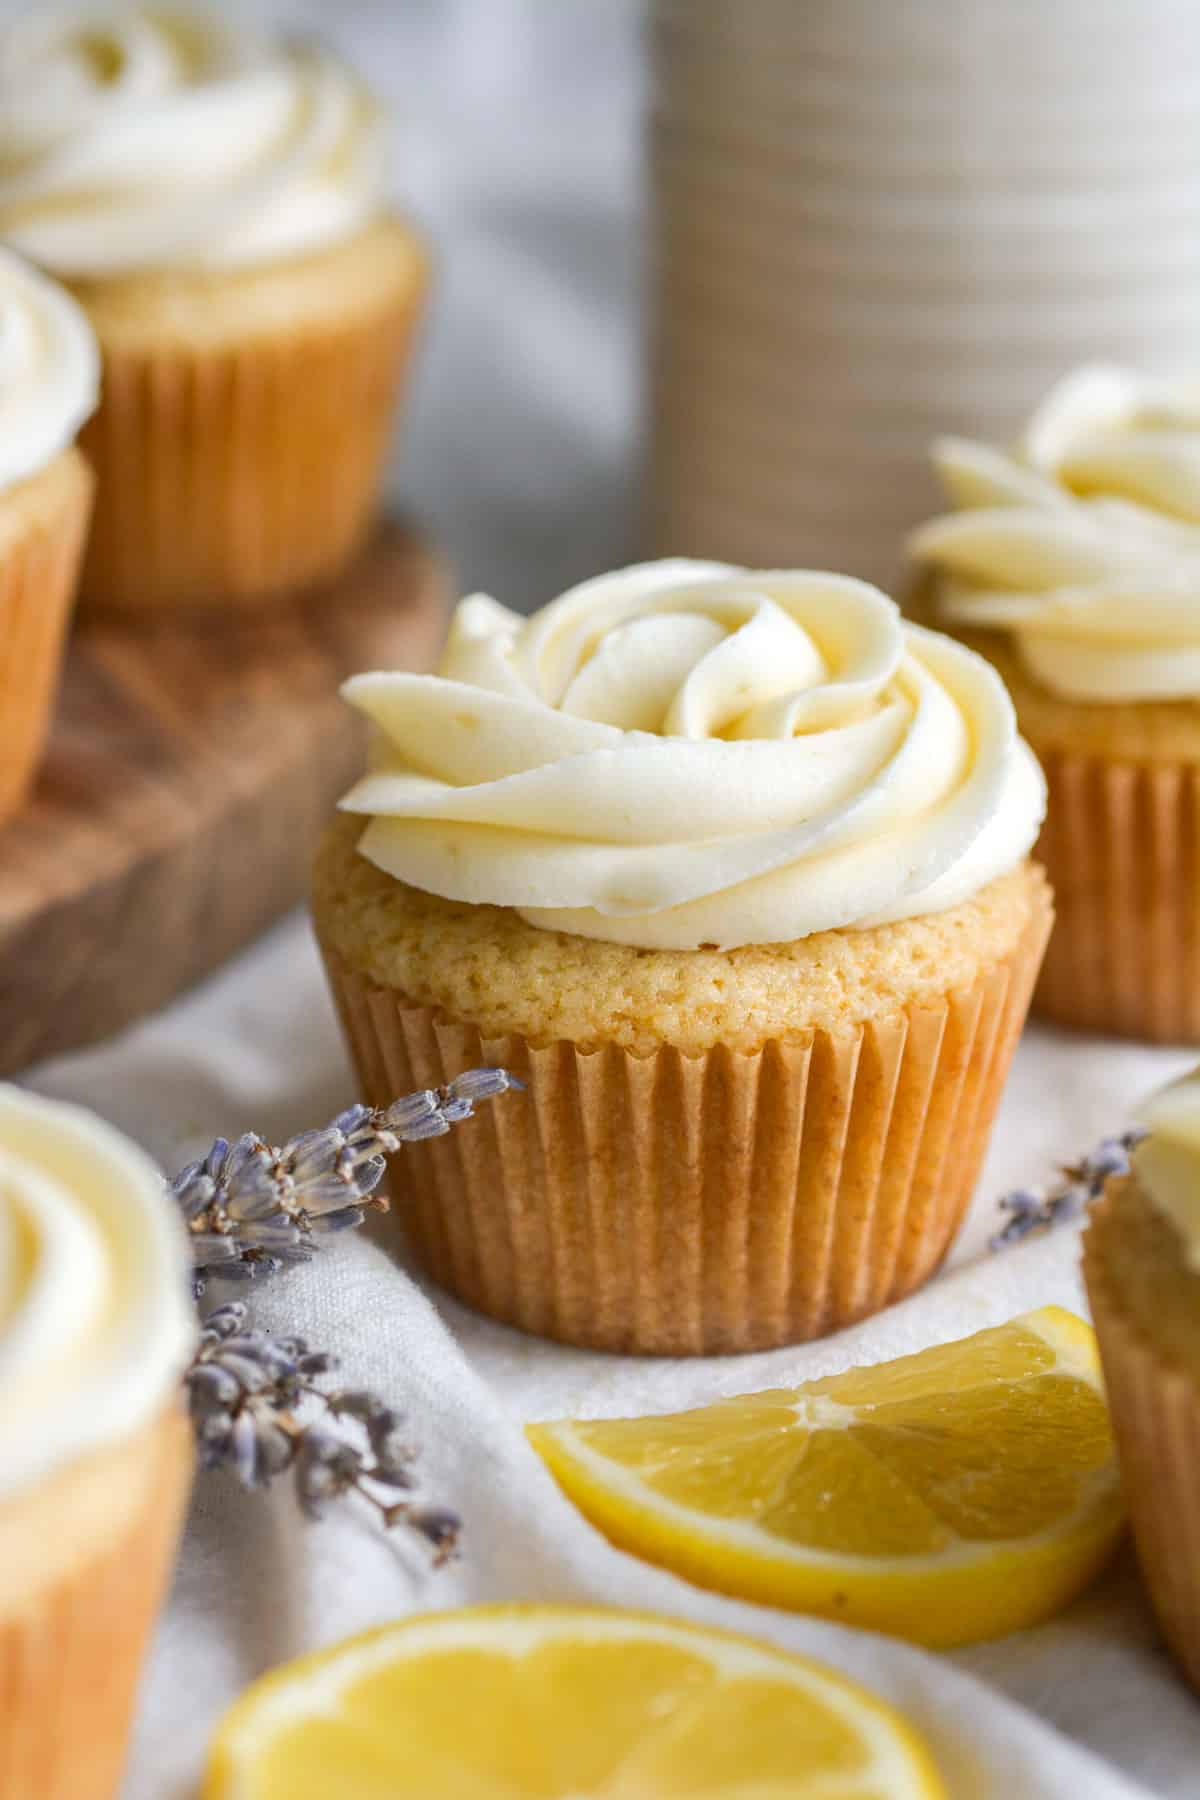 Vegan Lavender Cupcake topped with lemon frosting on a cloth with lemon slices in the foreground.